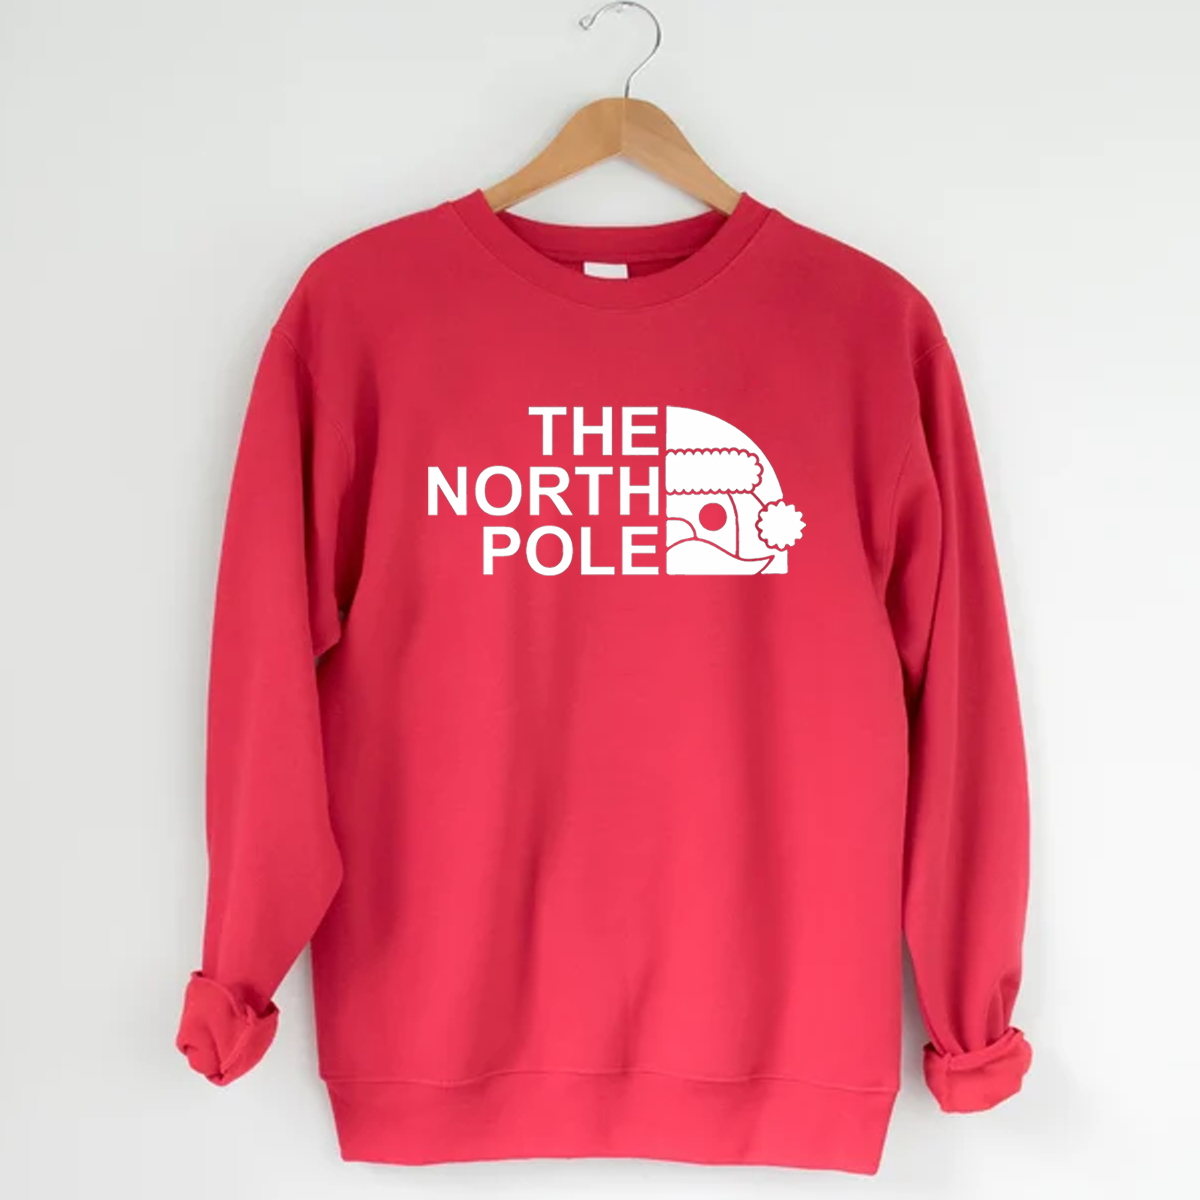 The North Pole Christmas Jumper